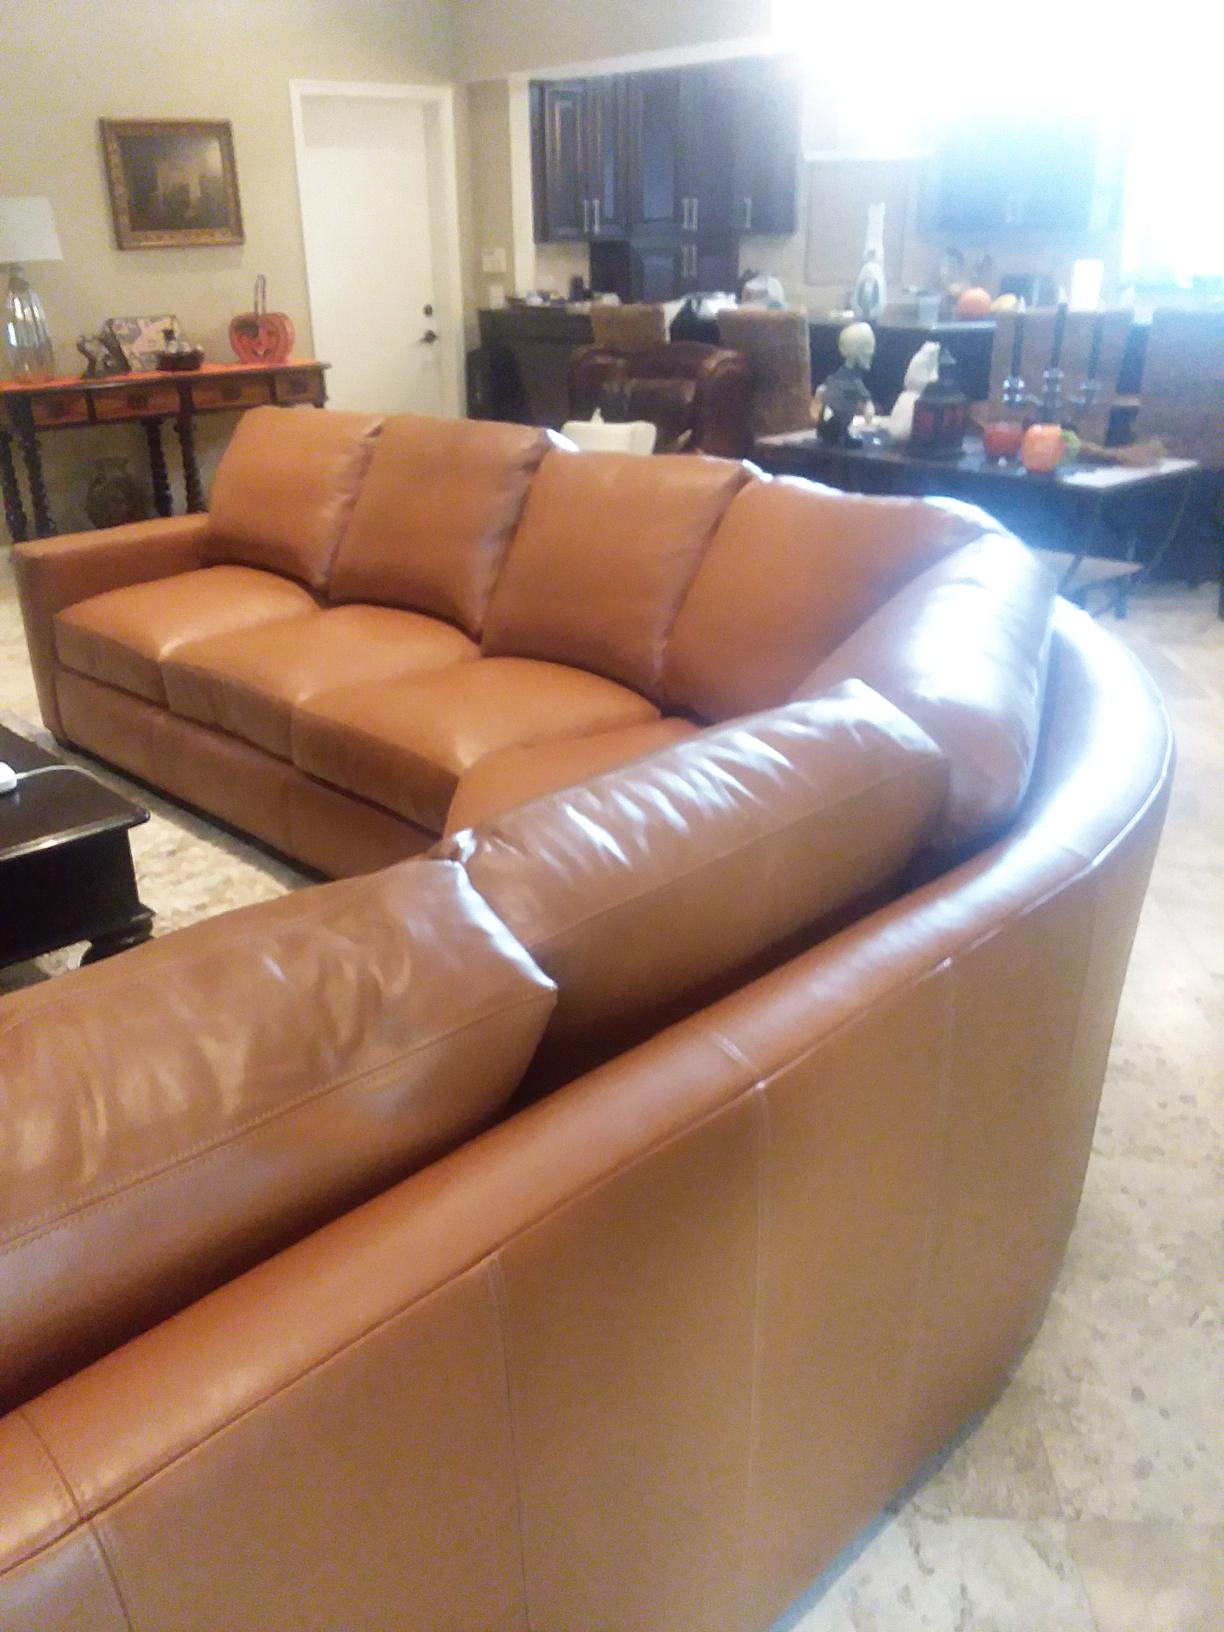 American Heritage Custom Giselle Petite Leather Sectional 